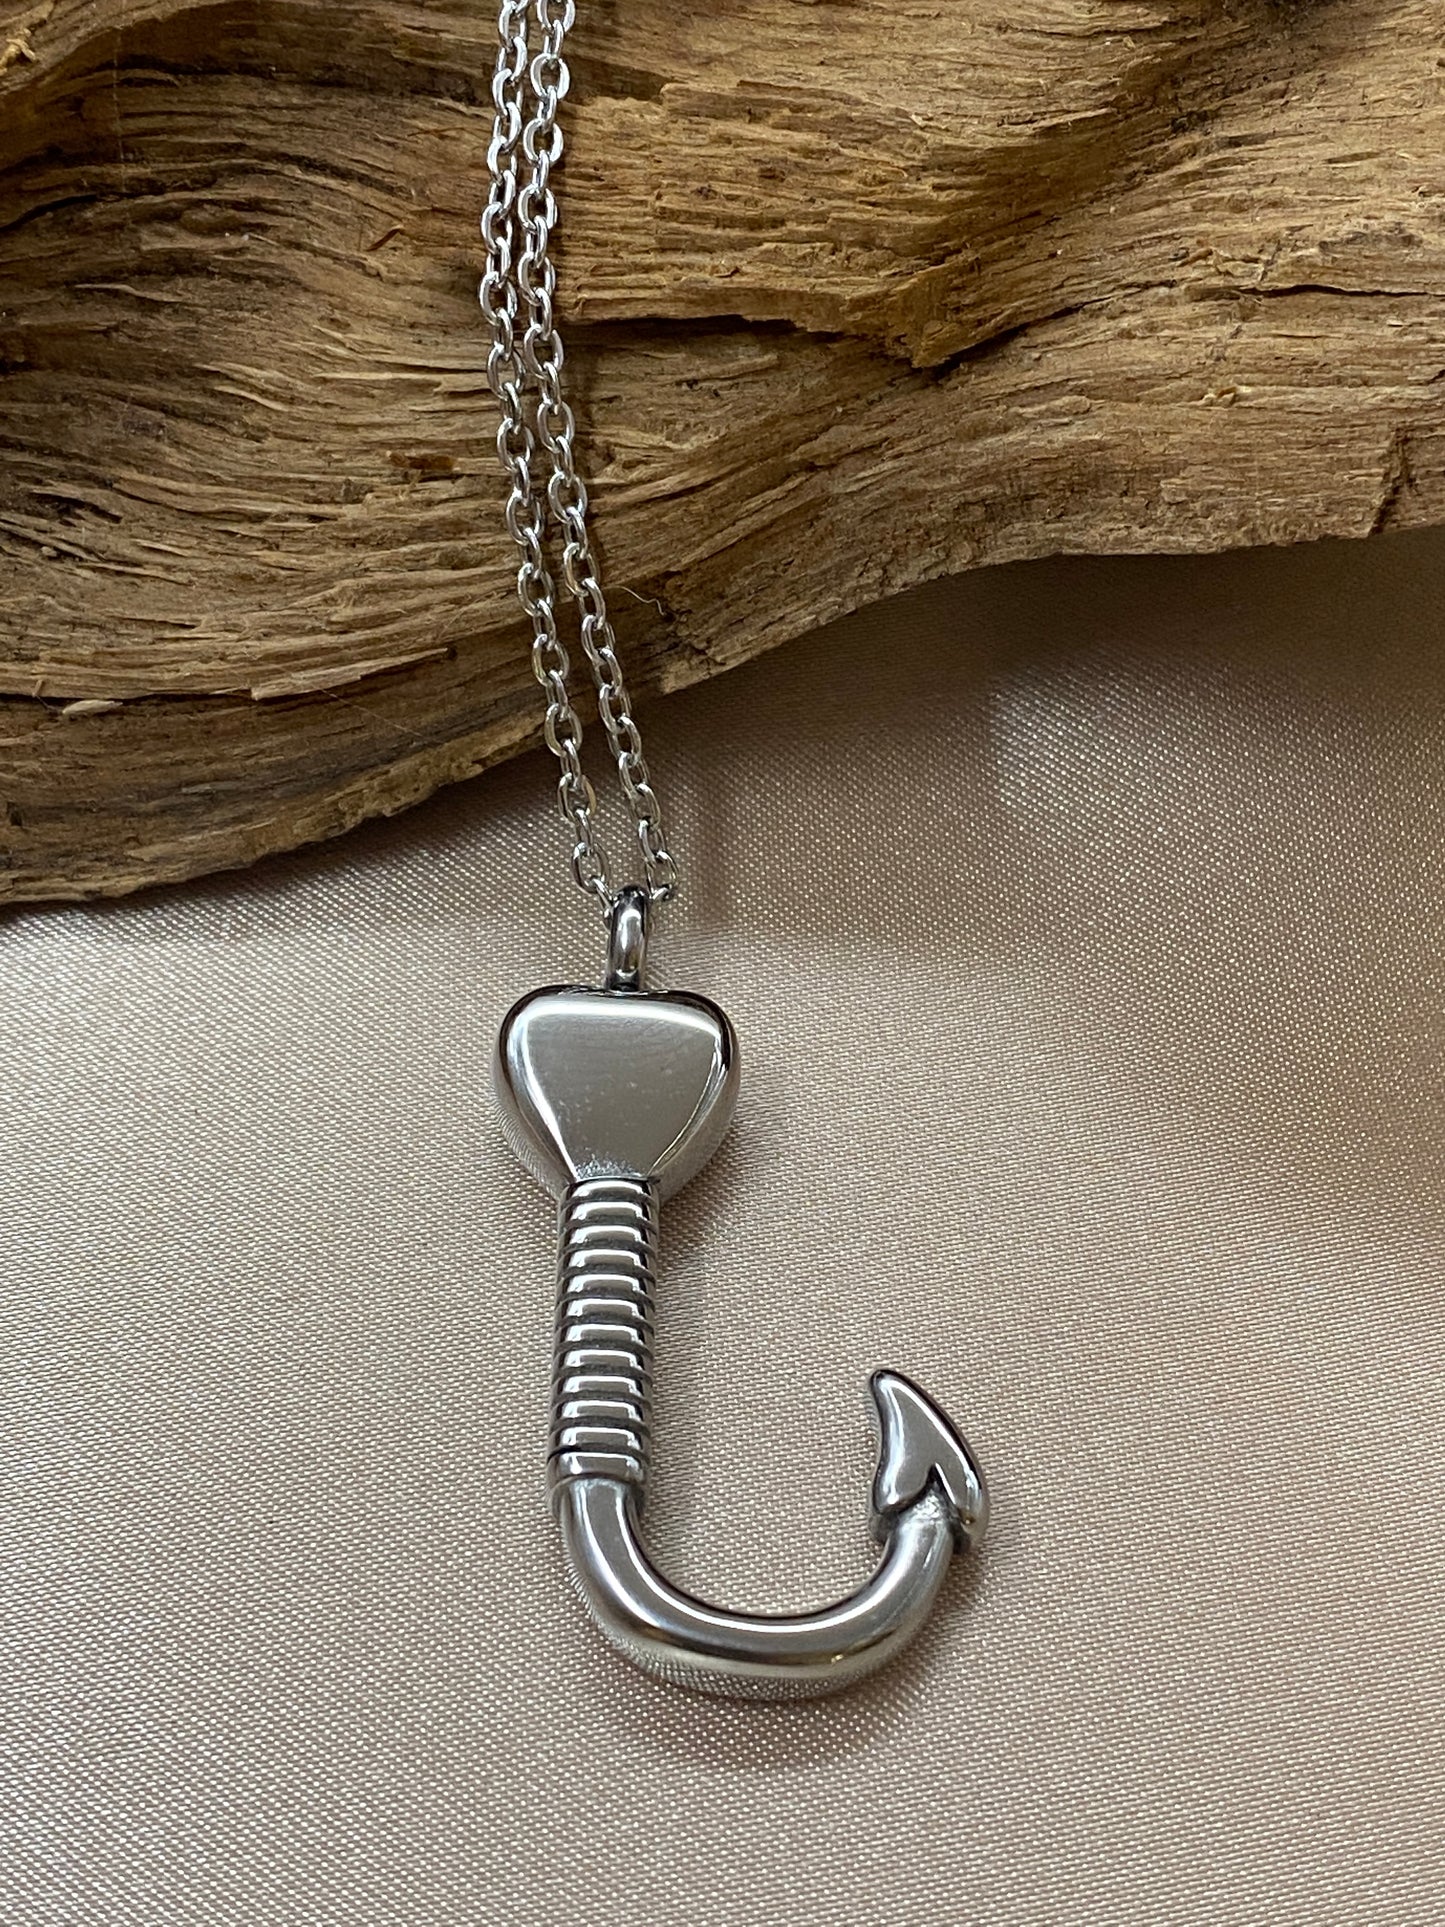 The Fish Hook Cremation Necklace - Jewelry for Ashes